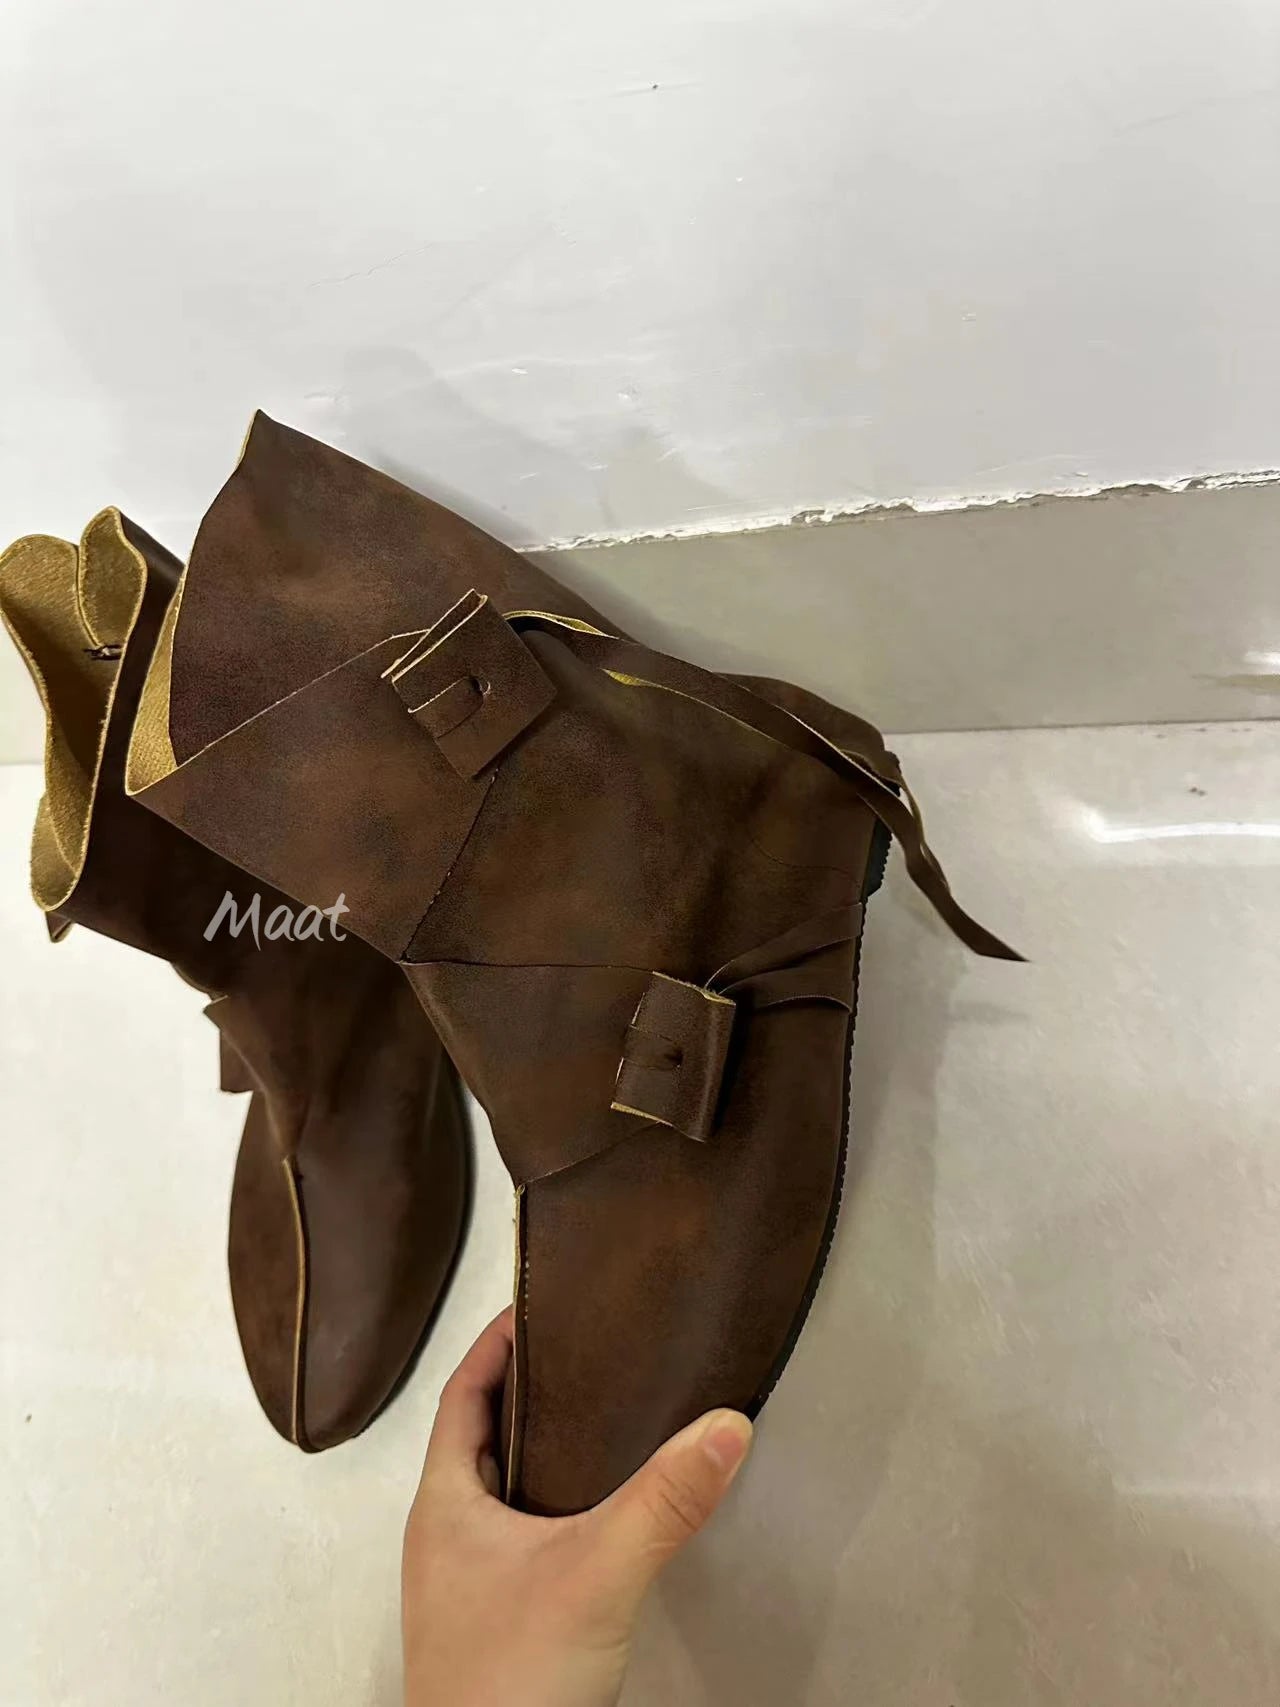 Renaissance Period Ankle Boots | Classic PU Leather Footwear for Historical Enactments